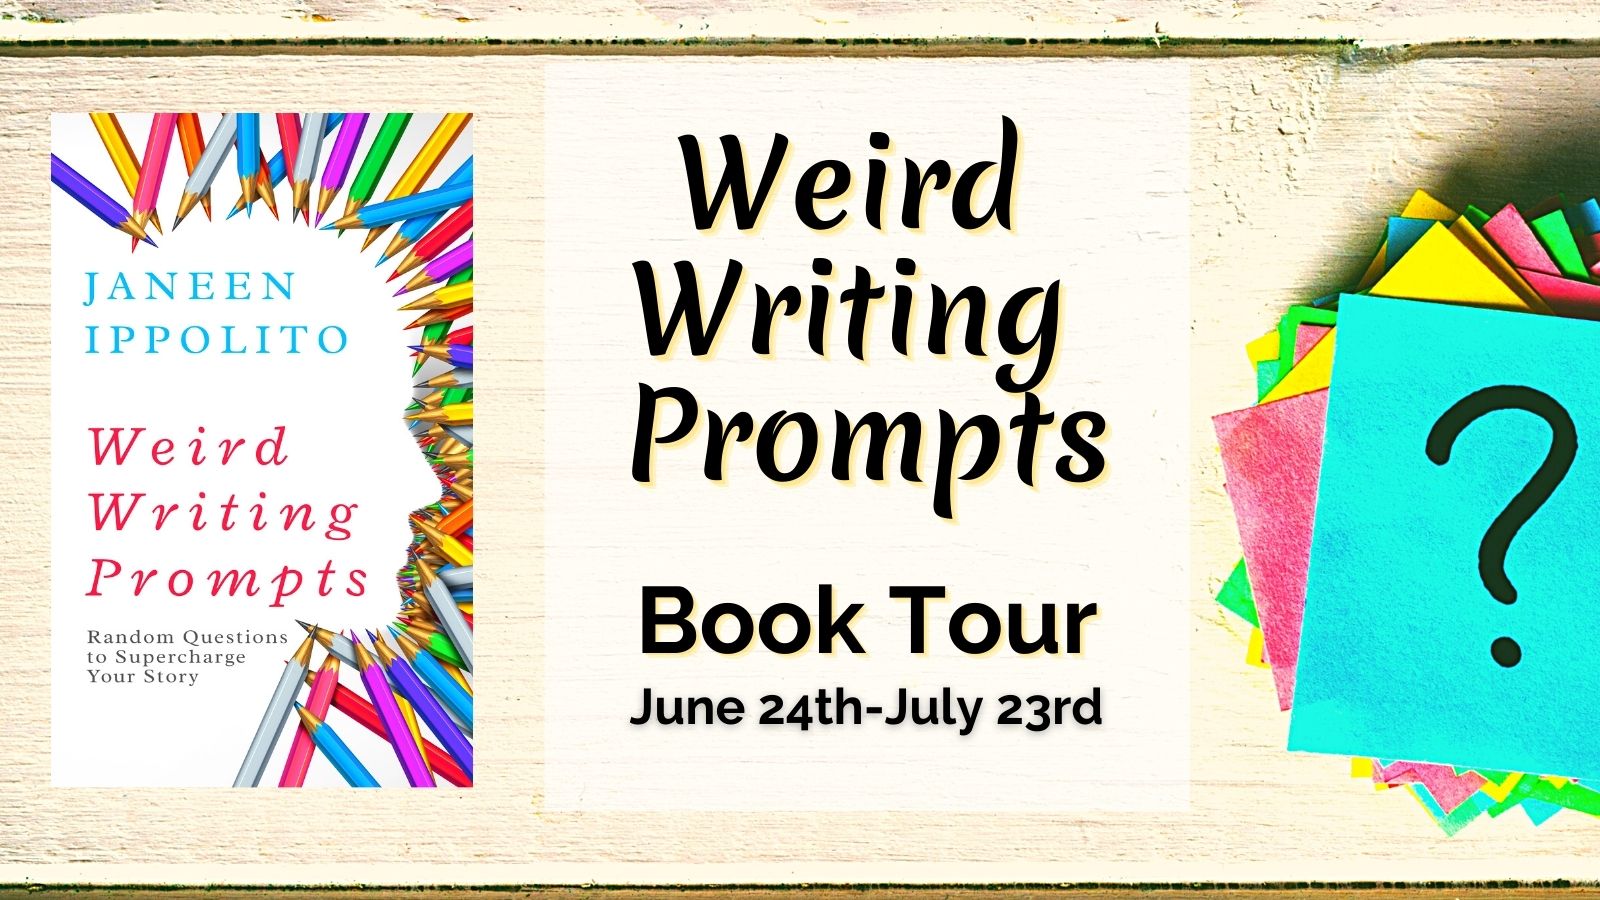 You are currently viewing Weird Writing Prompts by Janeen Ippolito